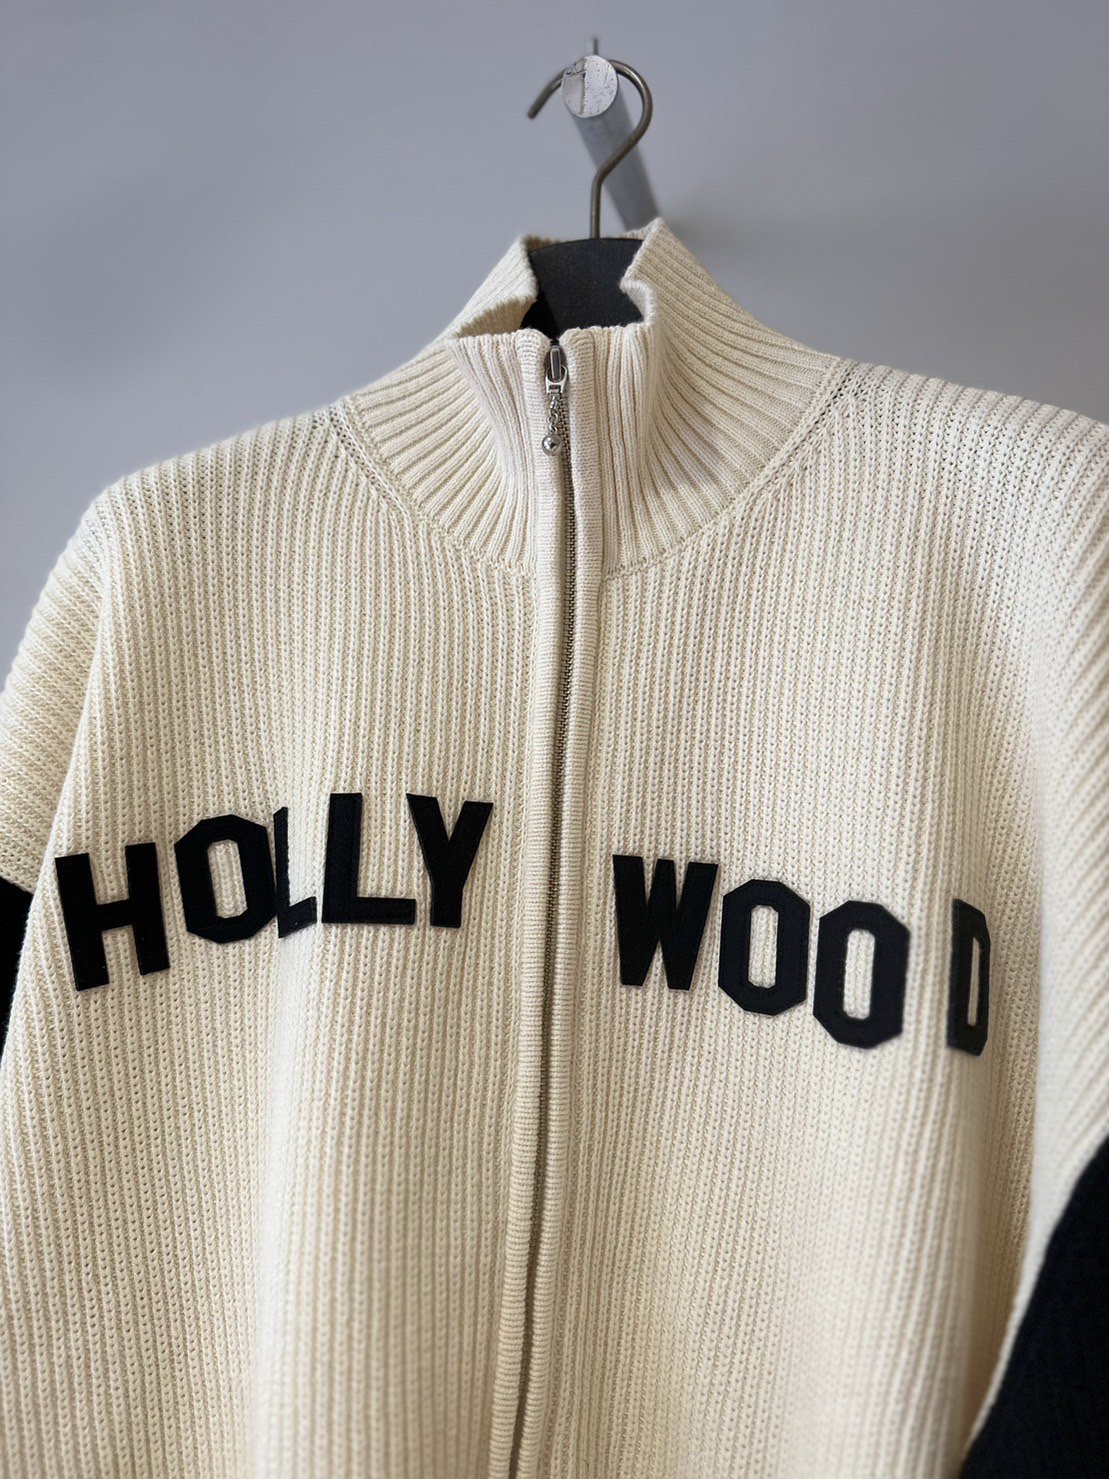 DAIRIKU<br />HOLLYWOOD Drivers Knit / White&Black<img class='new_mark_img2' src='https://img.shop-pro.jp/img/new/icons47.gif' style='border:none;display:inline;margin:0px;padding:0px;width:auto;' />